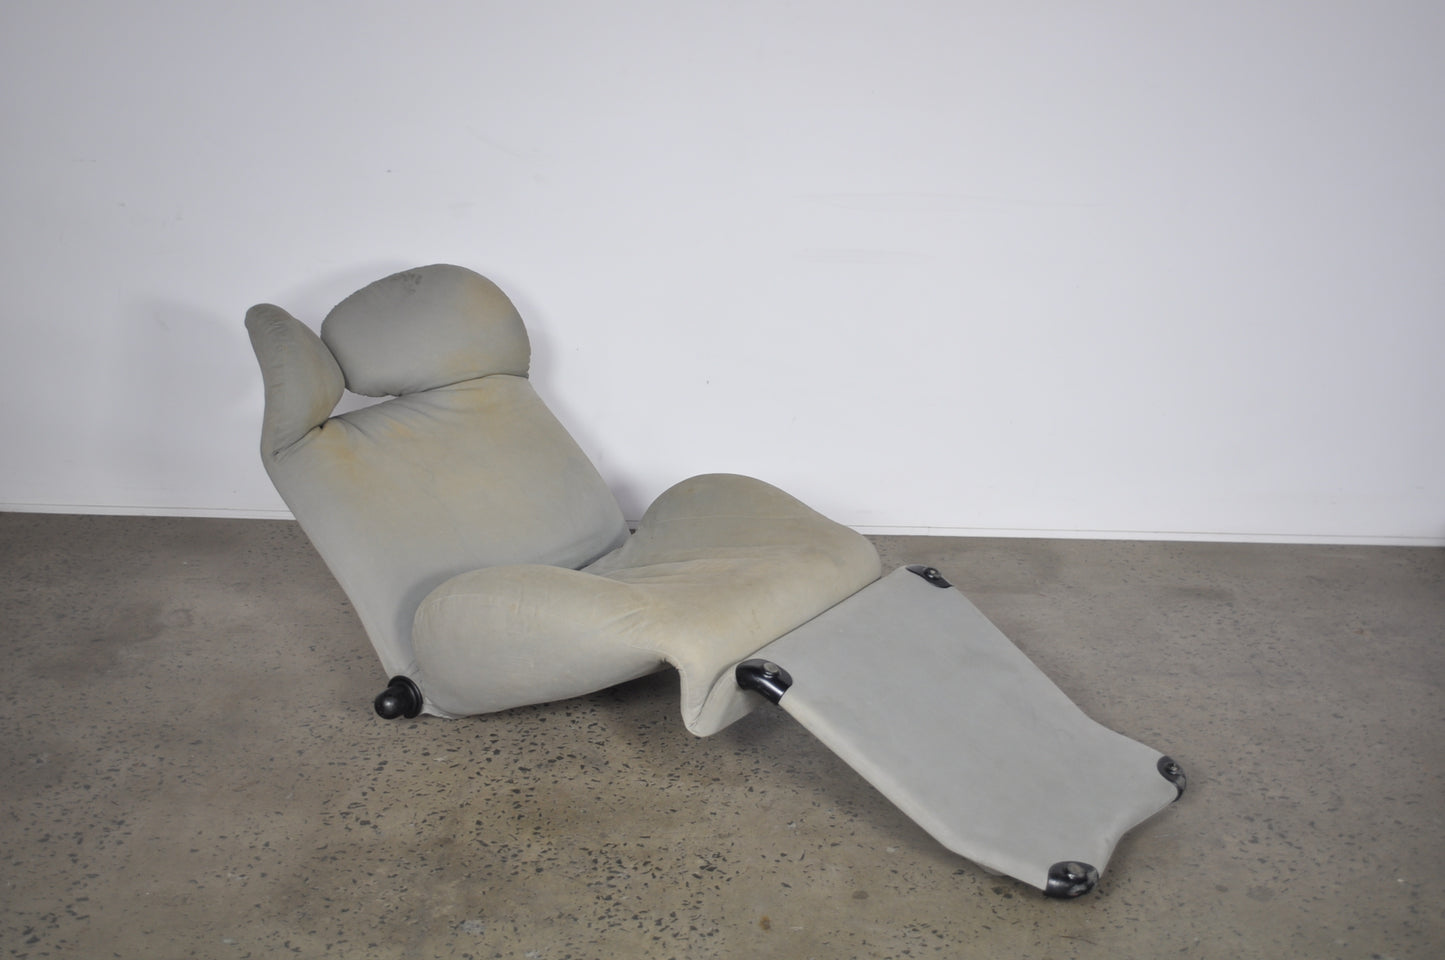 Wink Lounge Chair by Toshiyuki Kita for Cassina. Restoration project.